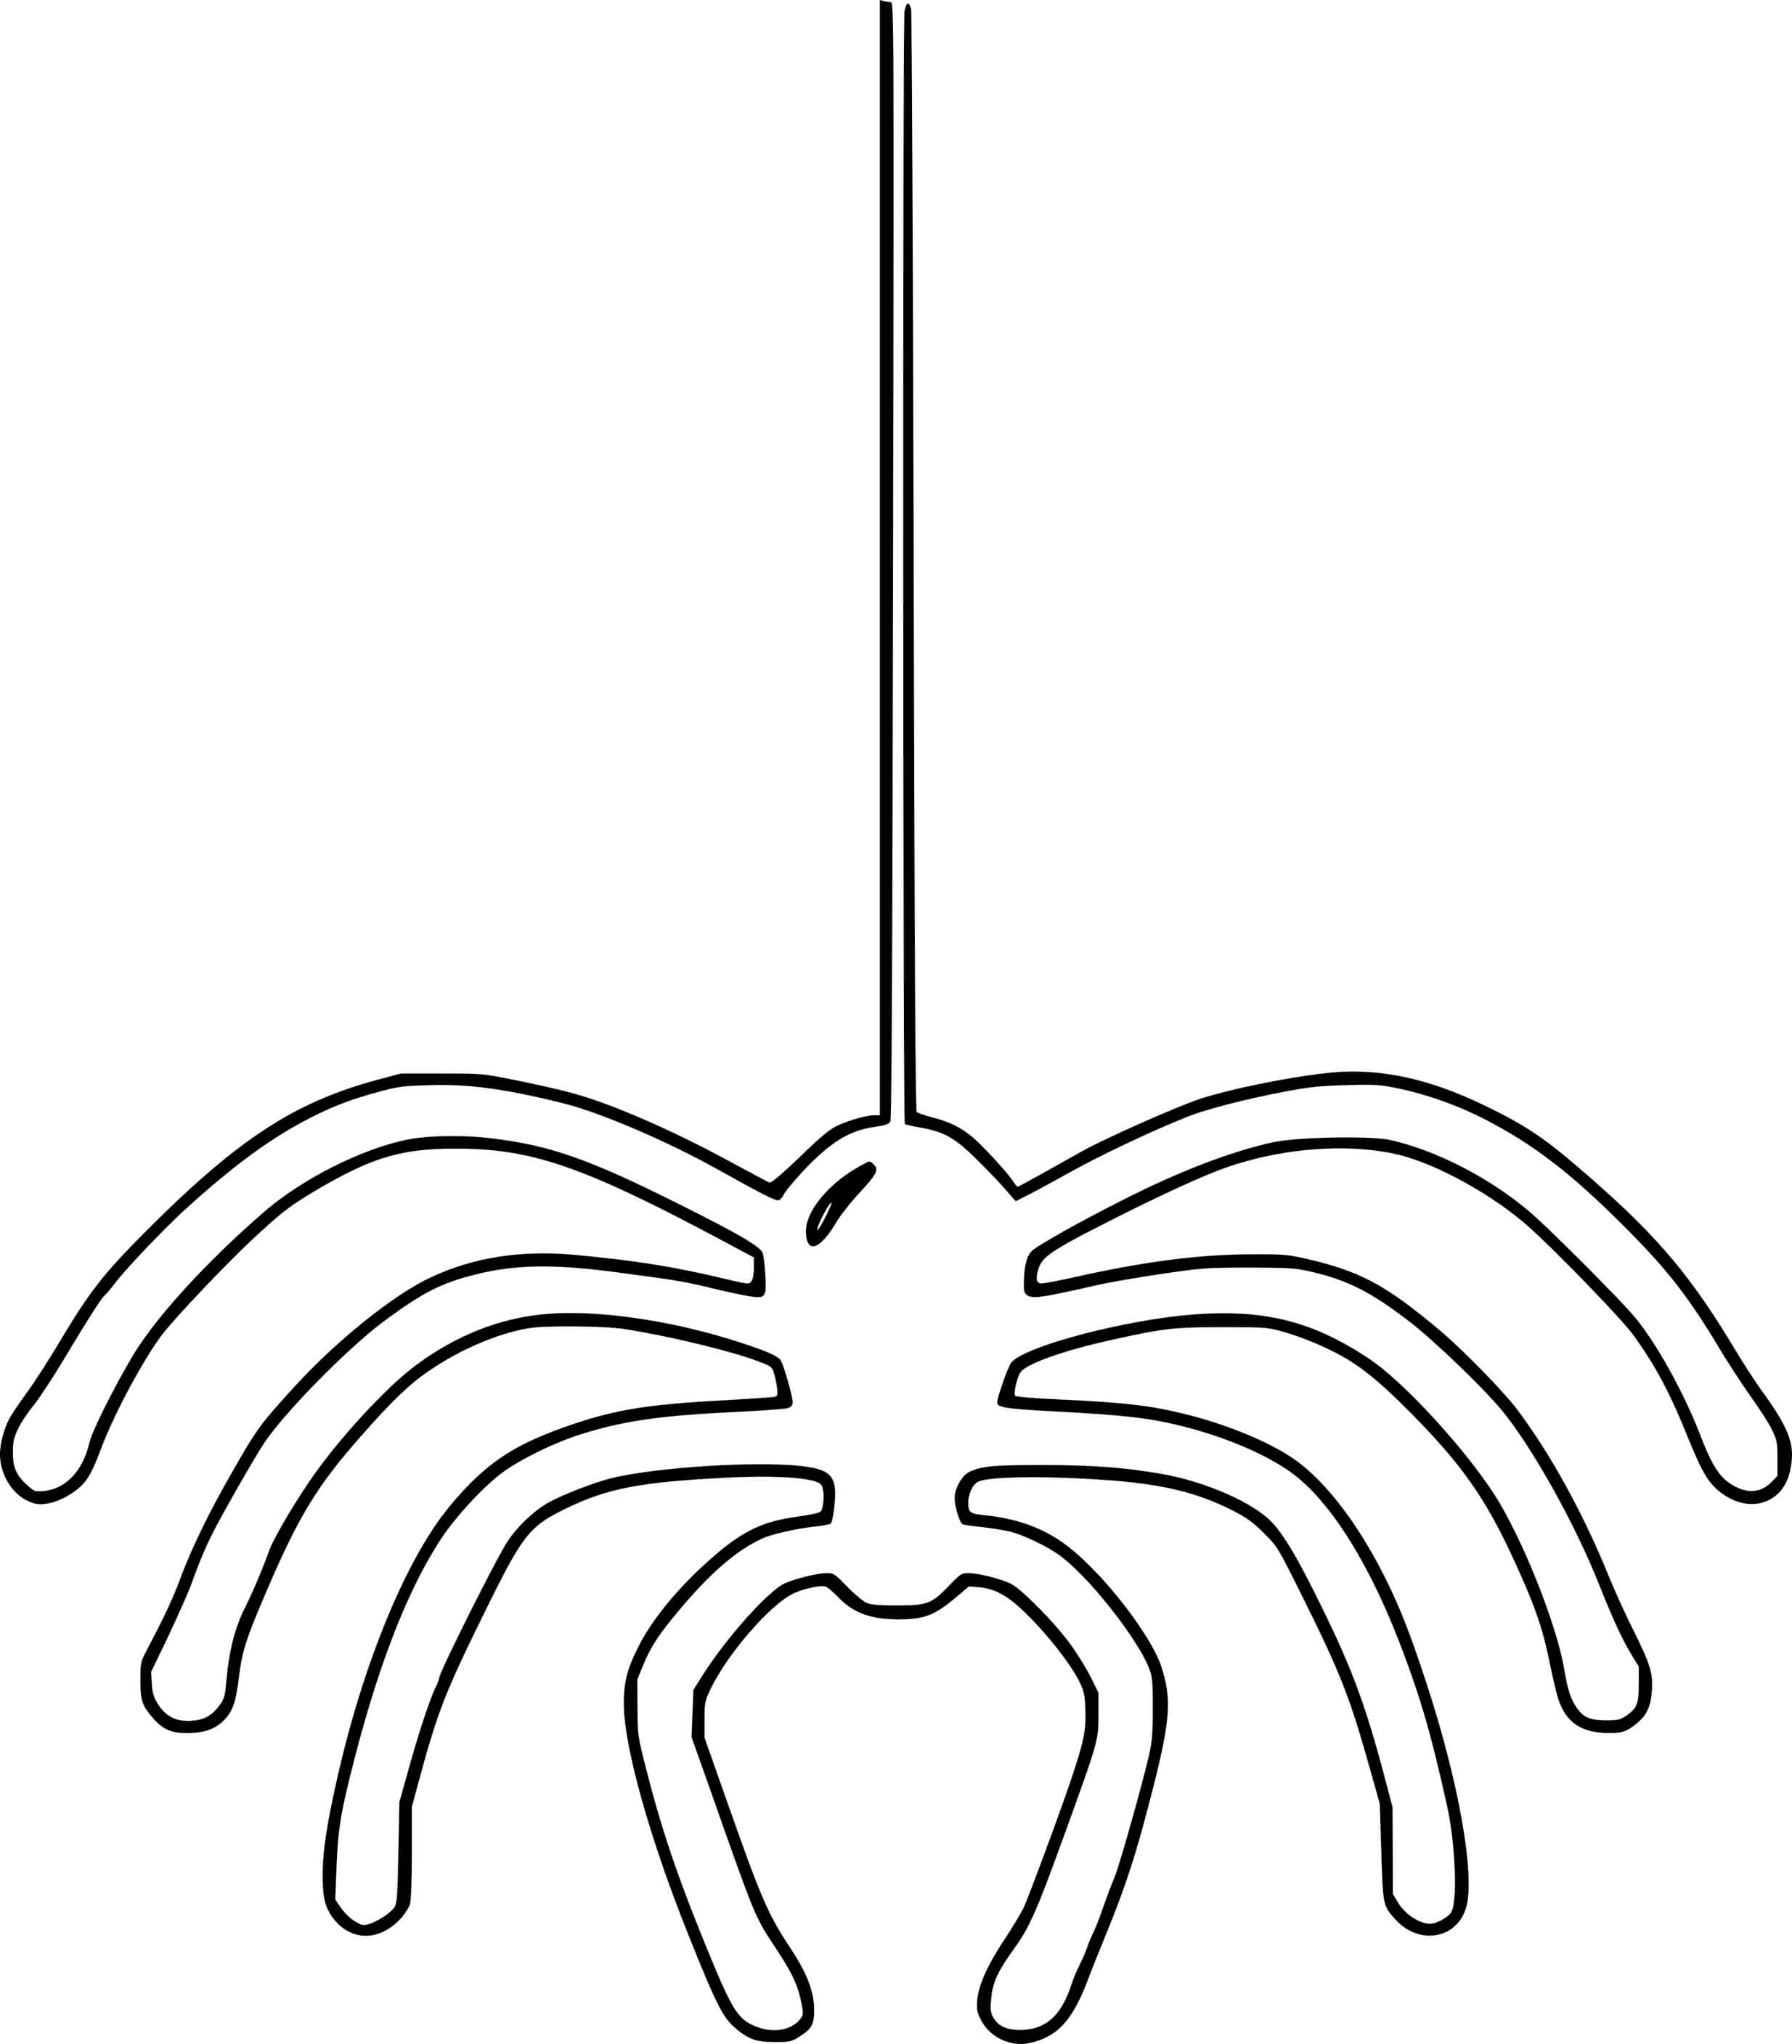 Spider From The Up Outline